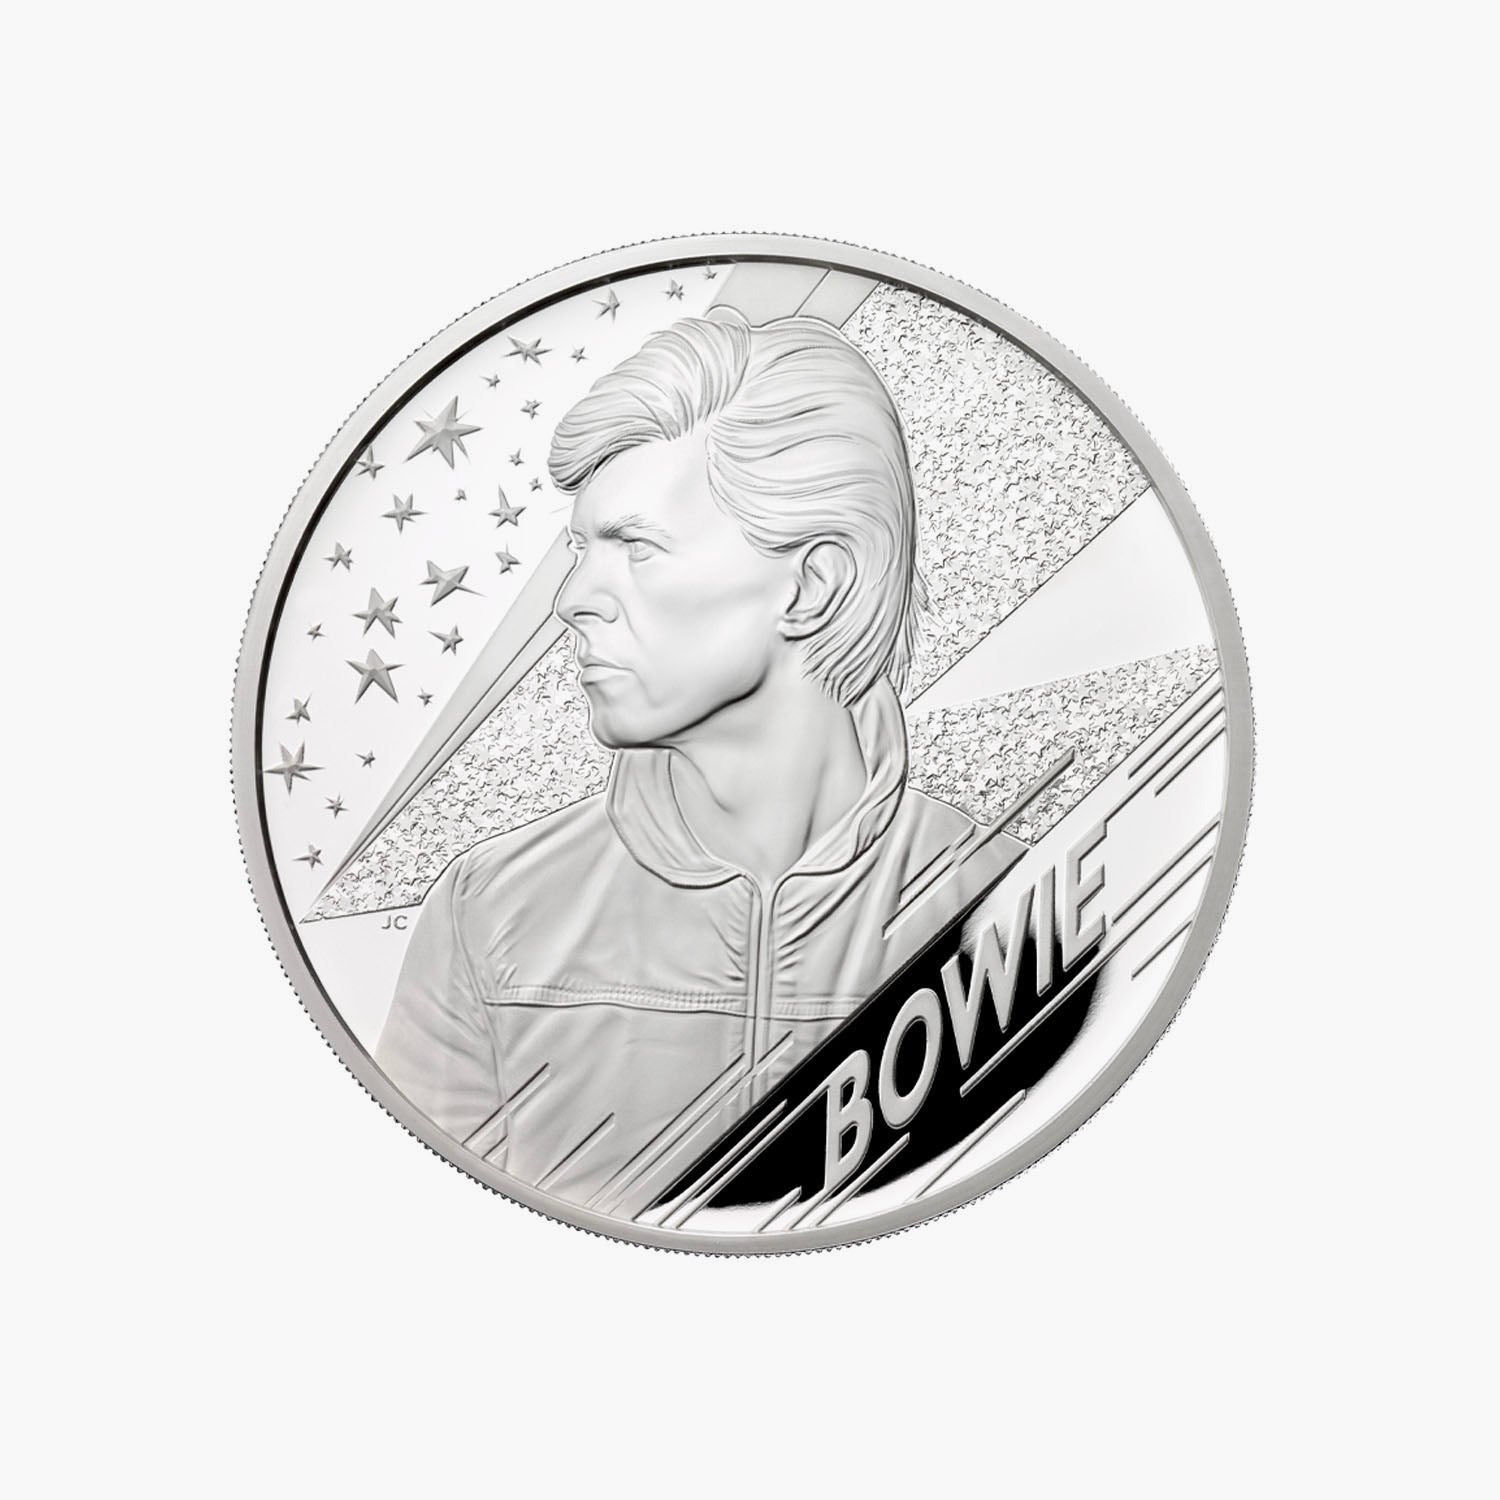 David Bowie 2020 UK Five Ounce Silver Proof Coin